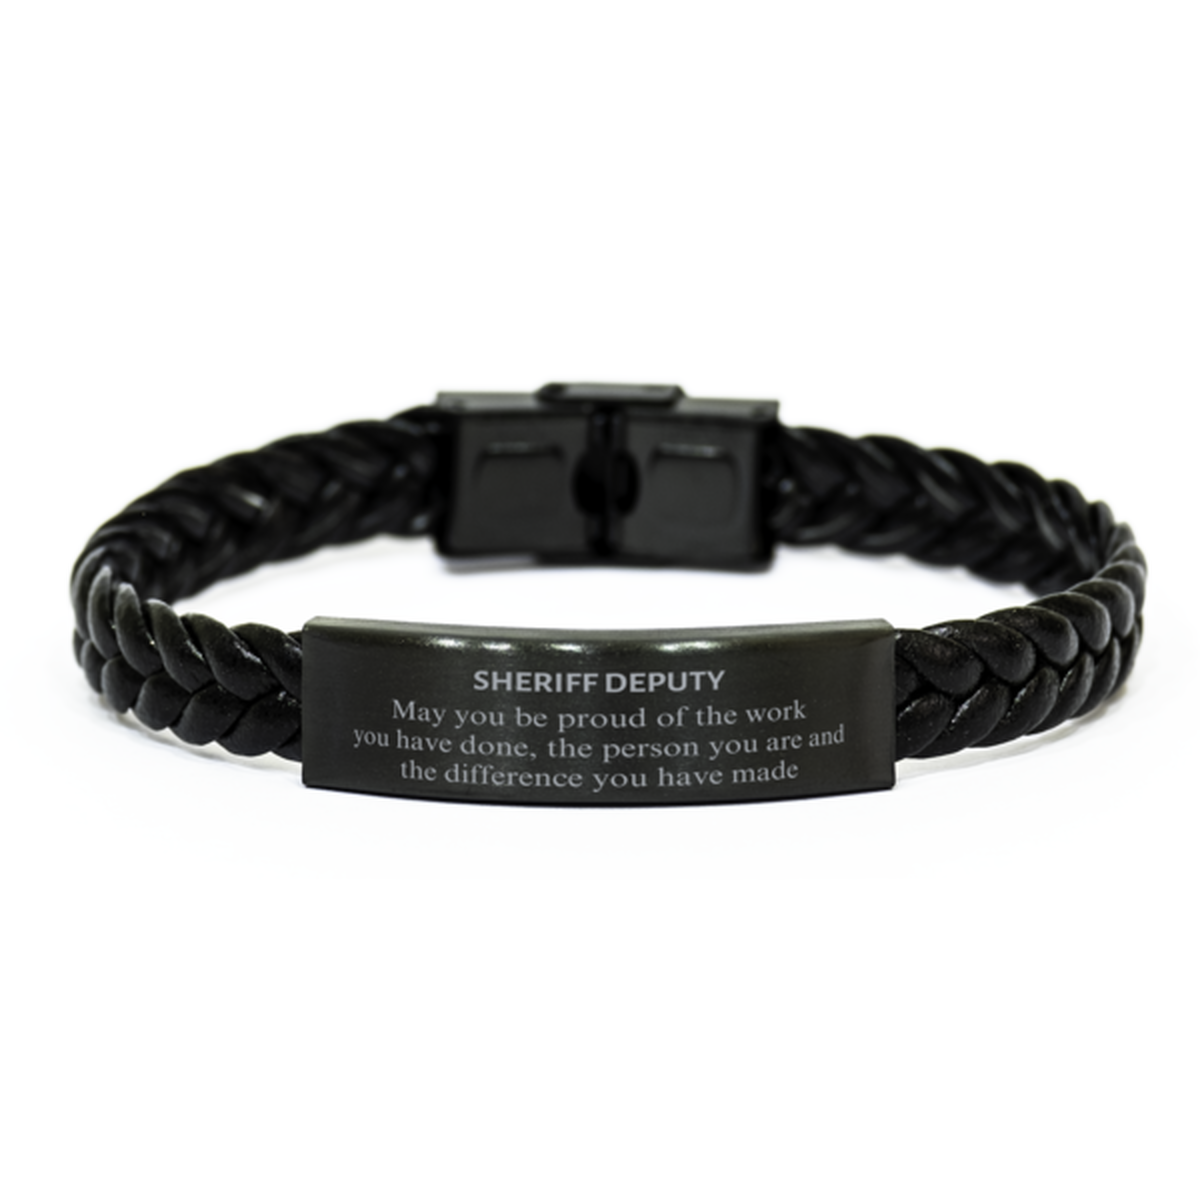 Sheriff Deputy May you be proud of the work you have done, Retirement Sheriff Deputy Braided Leather Bracelet for Colleague Appreciation Gifts Amazing for Sheriff Deputy